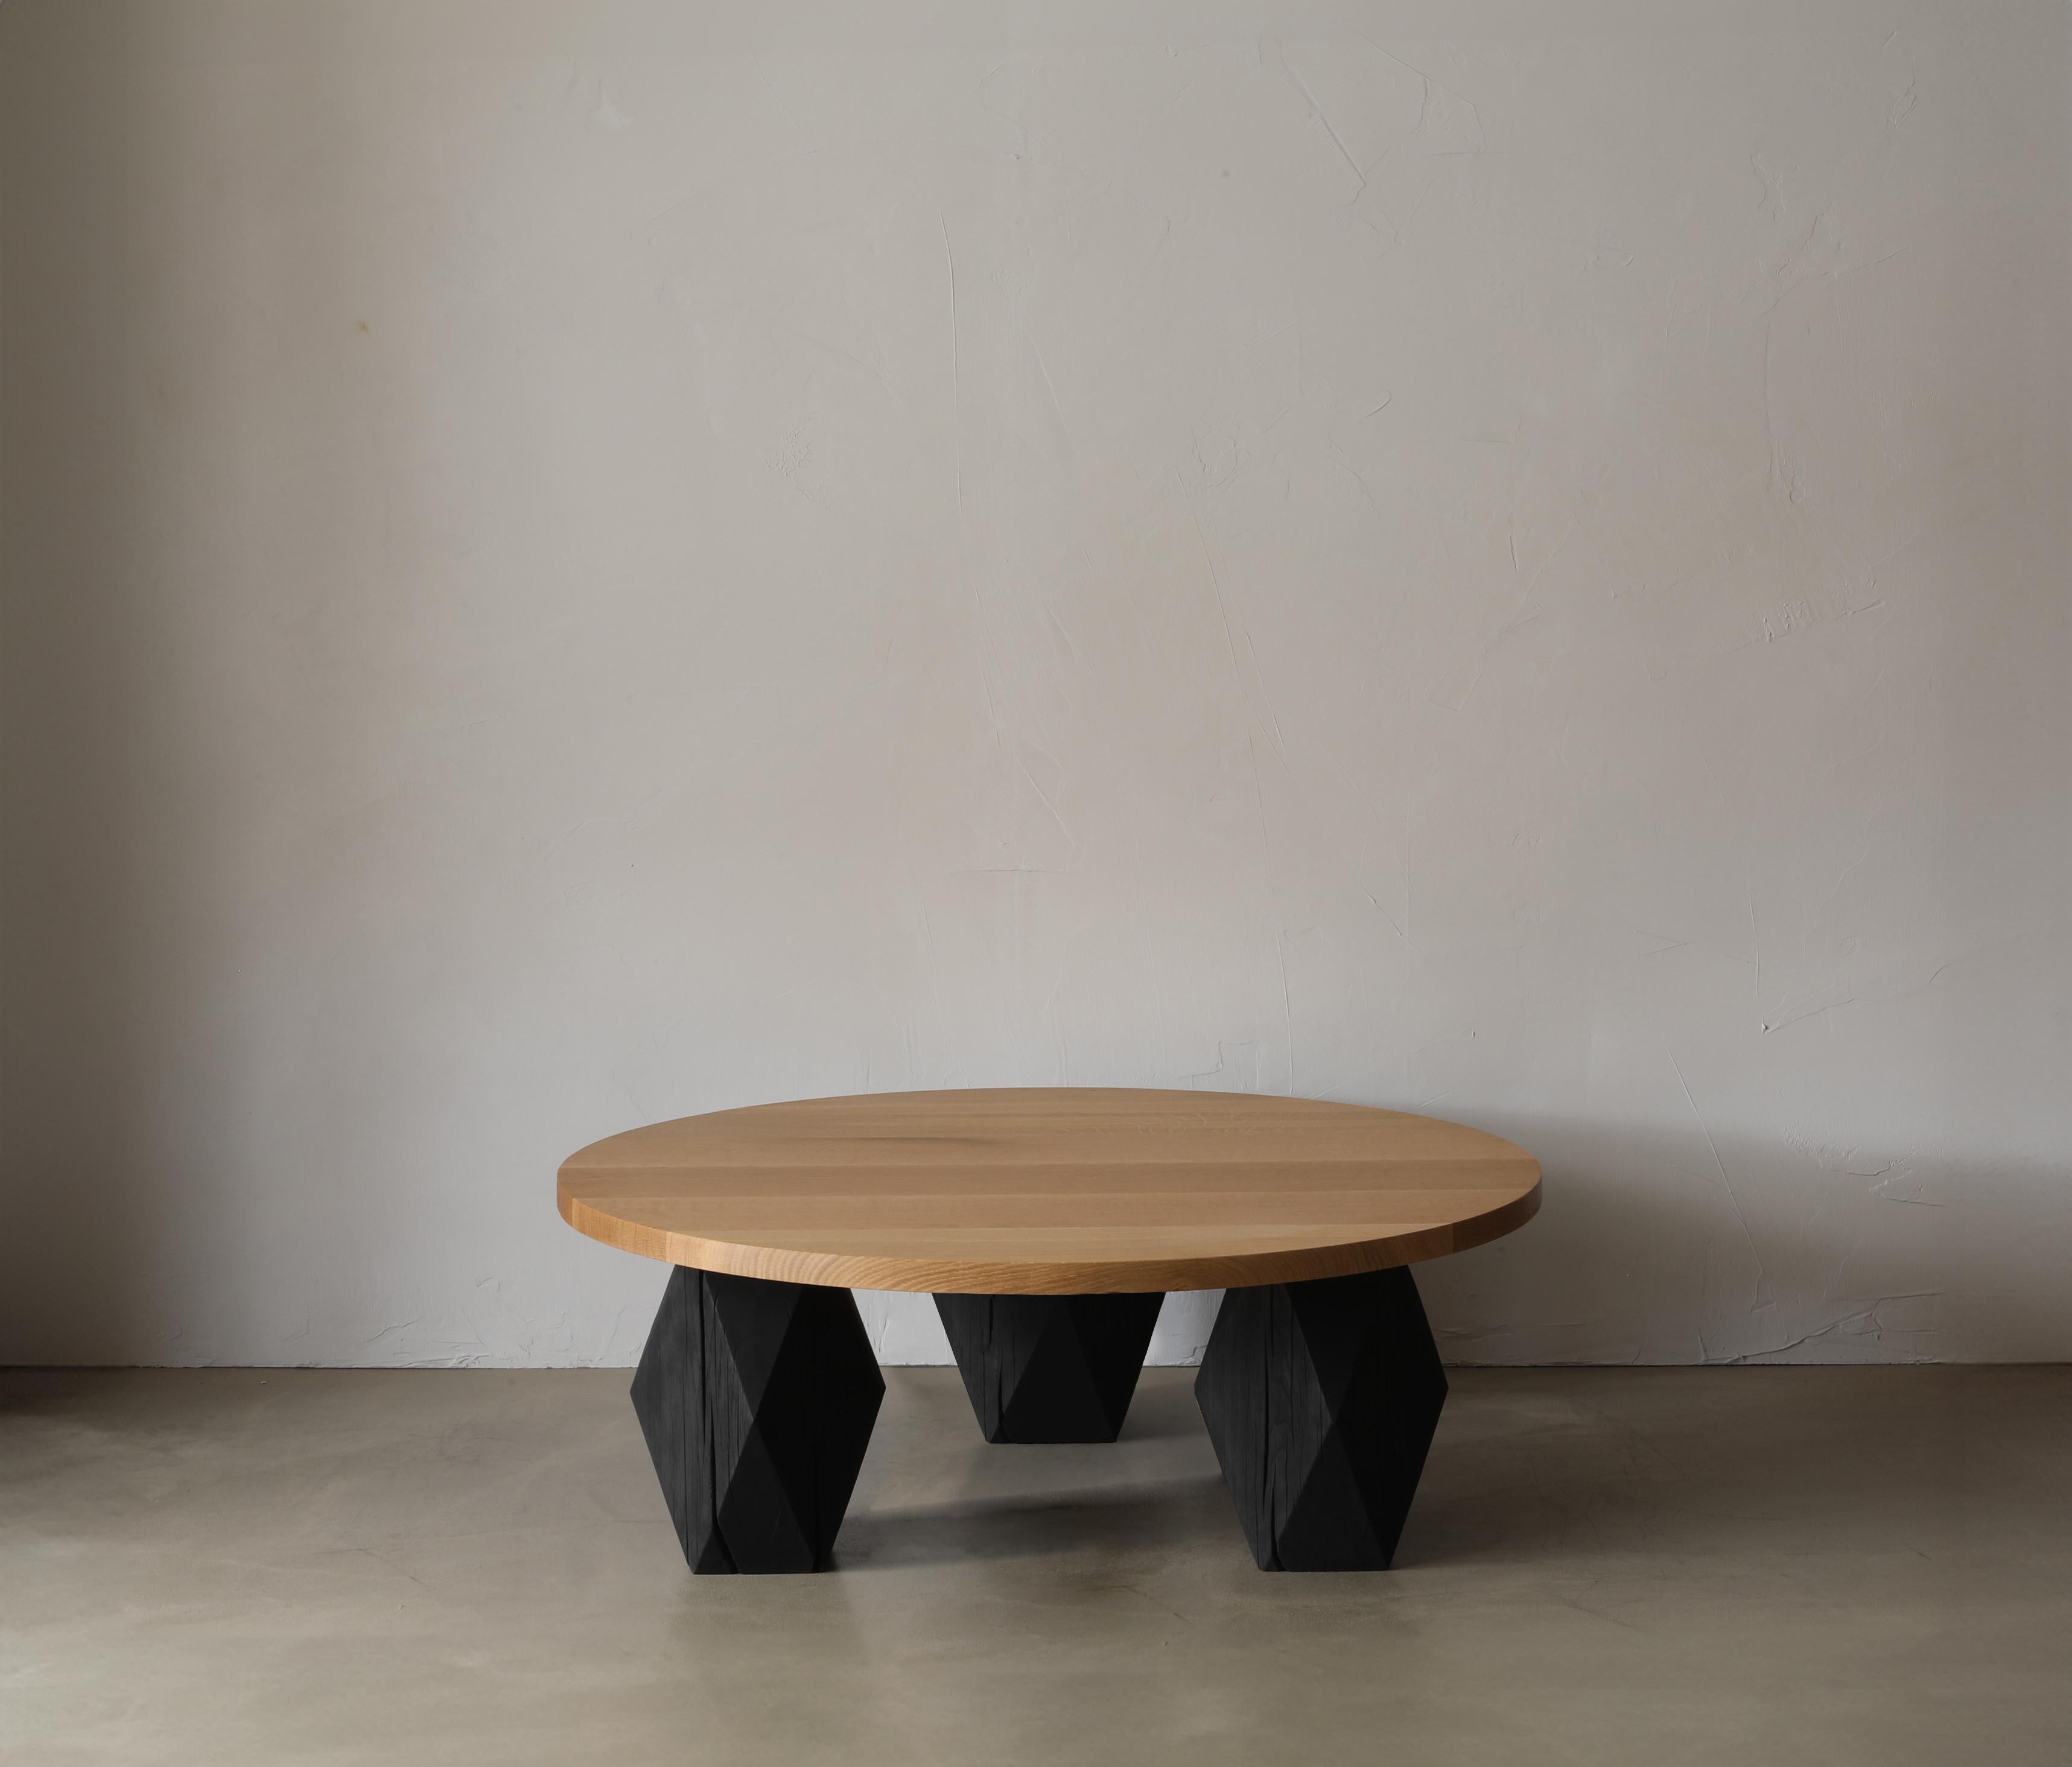 The Miter Coffee Table is 42” in diameter and 16” tall. The default top is rift-sawn white oak and the bases are solid white oak. Materials, finishes, and sizes may be optioned out at additional cost.

The MITER Collection – a sustainable